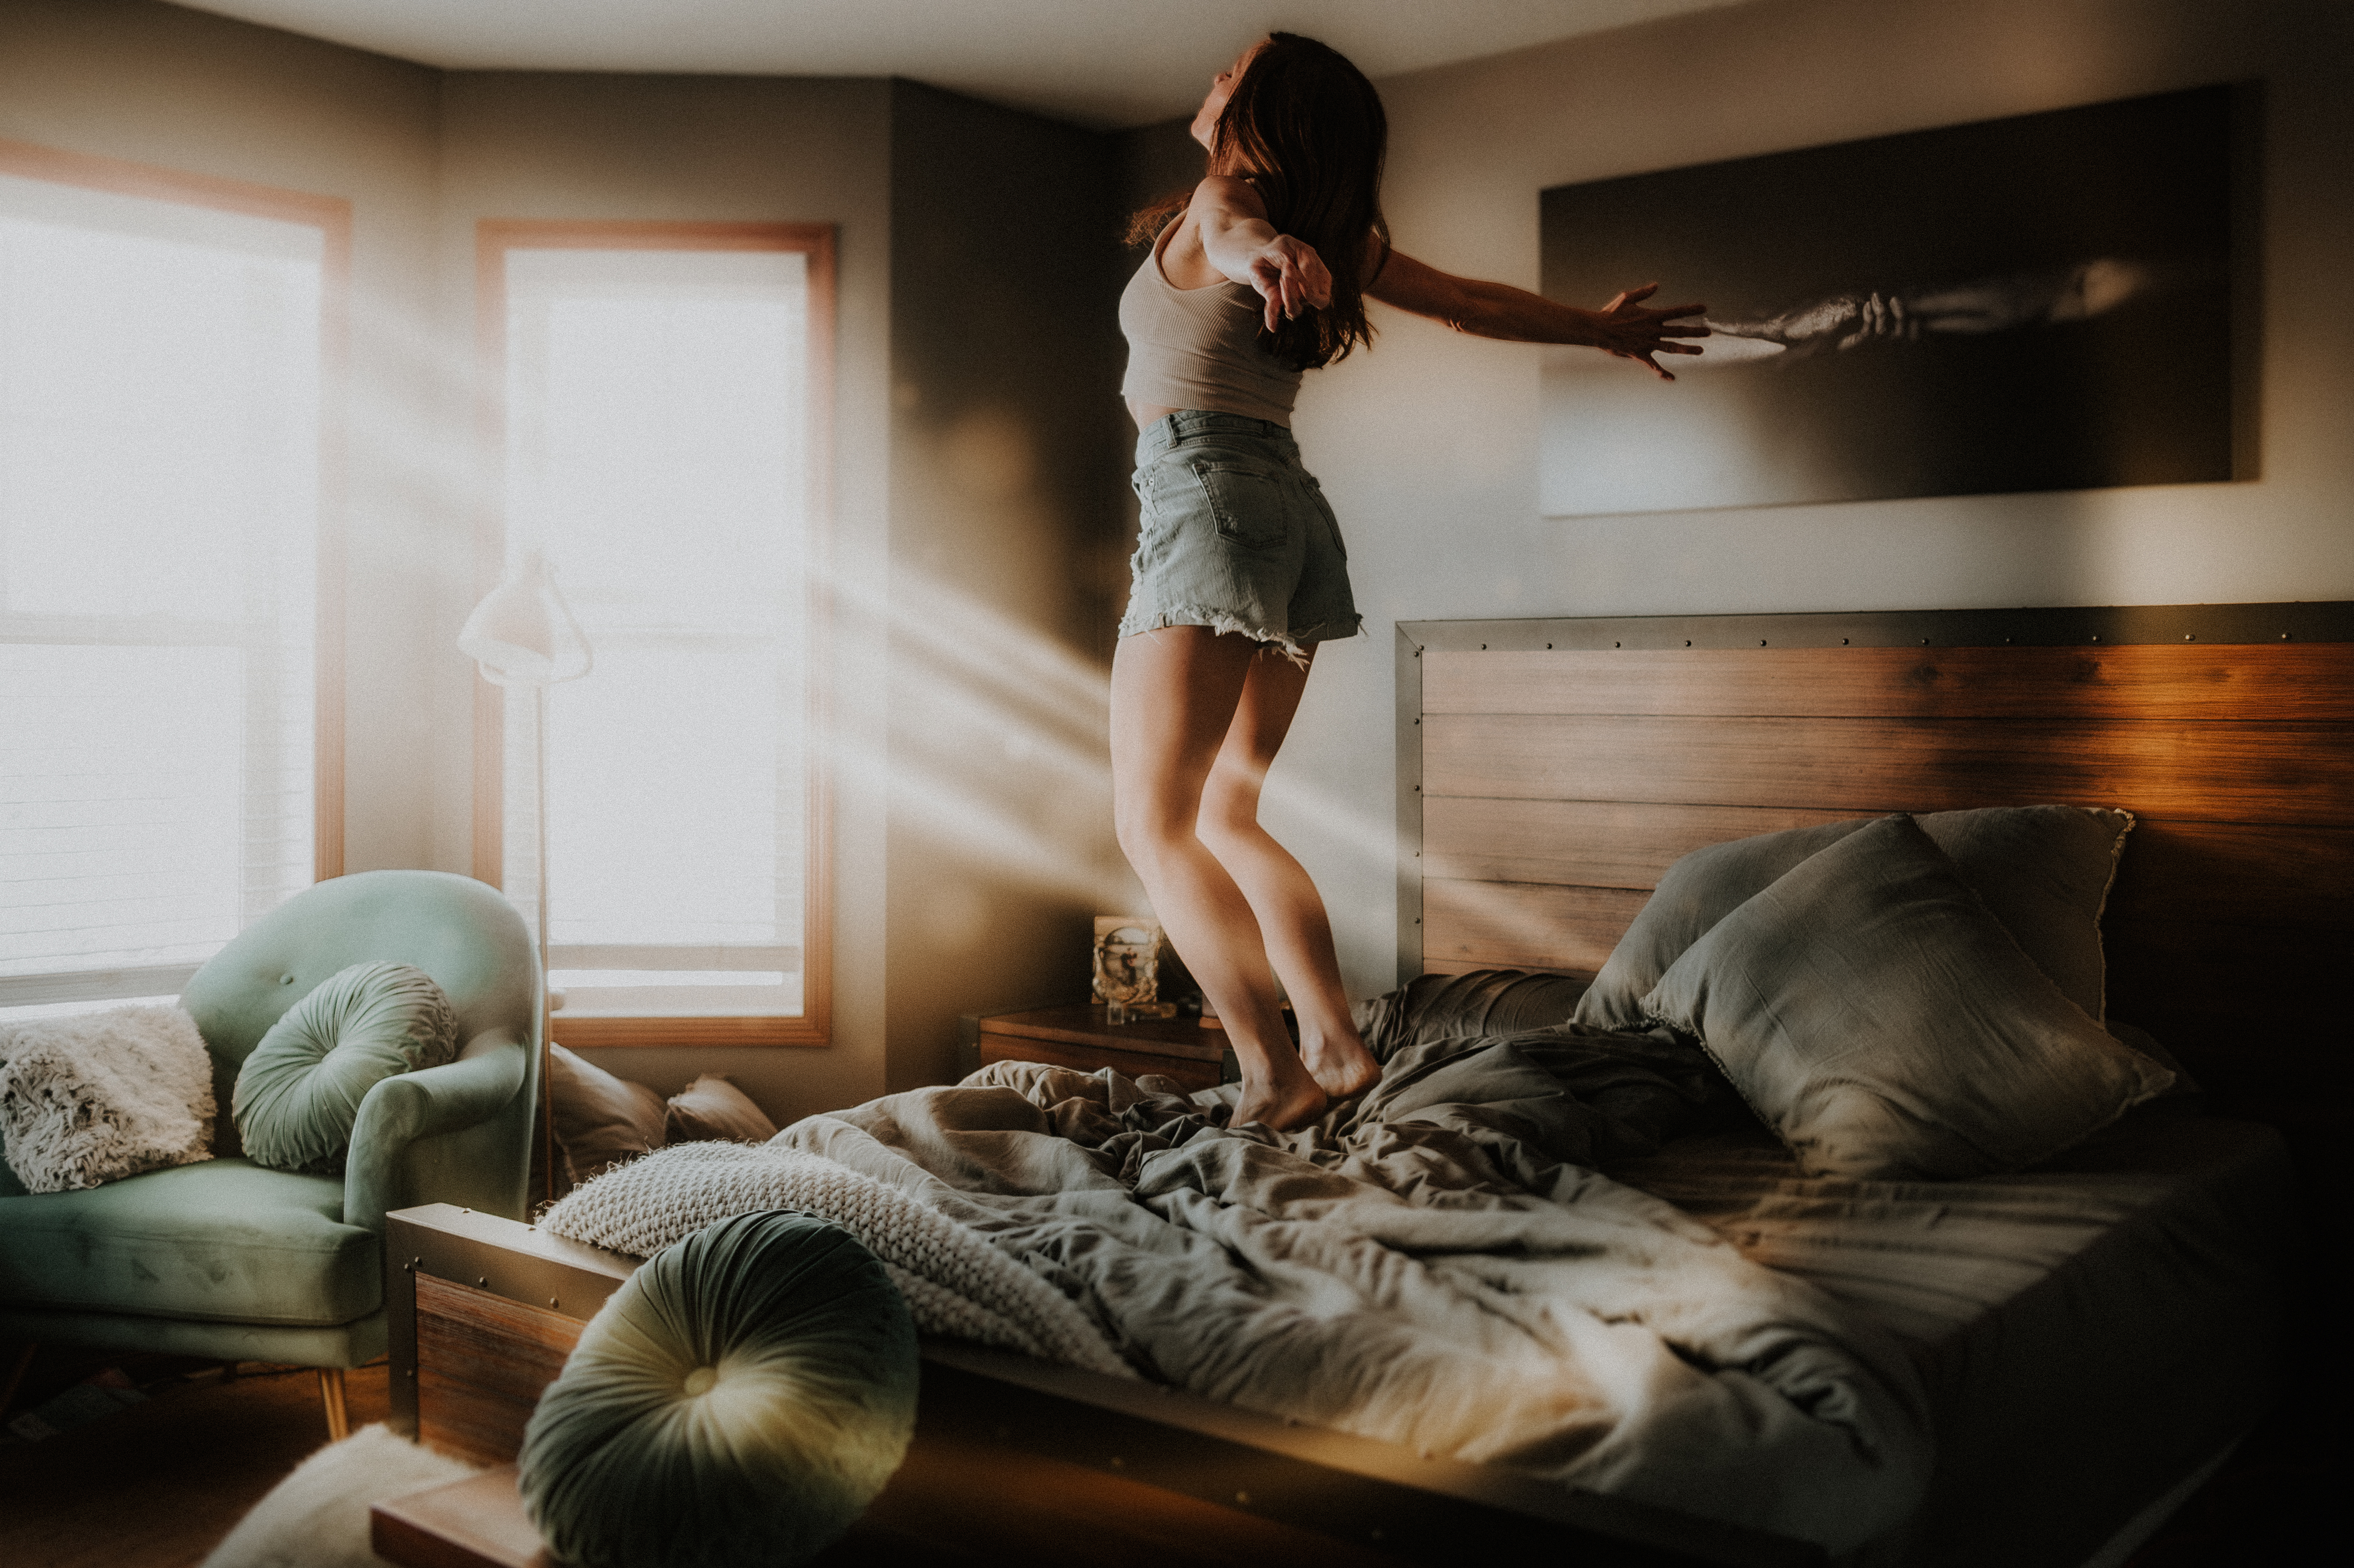 Self-portrait of a woman jumping on her bed towards beautiful light streaming in, showing resilience. This self-portrait photography course is Deaf and Hard of Hearing friendly